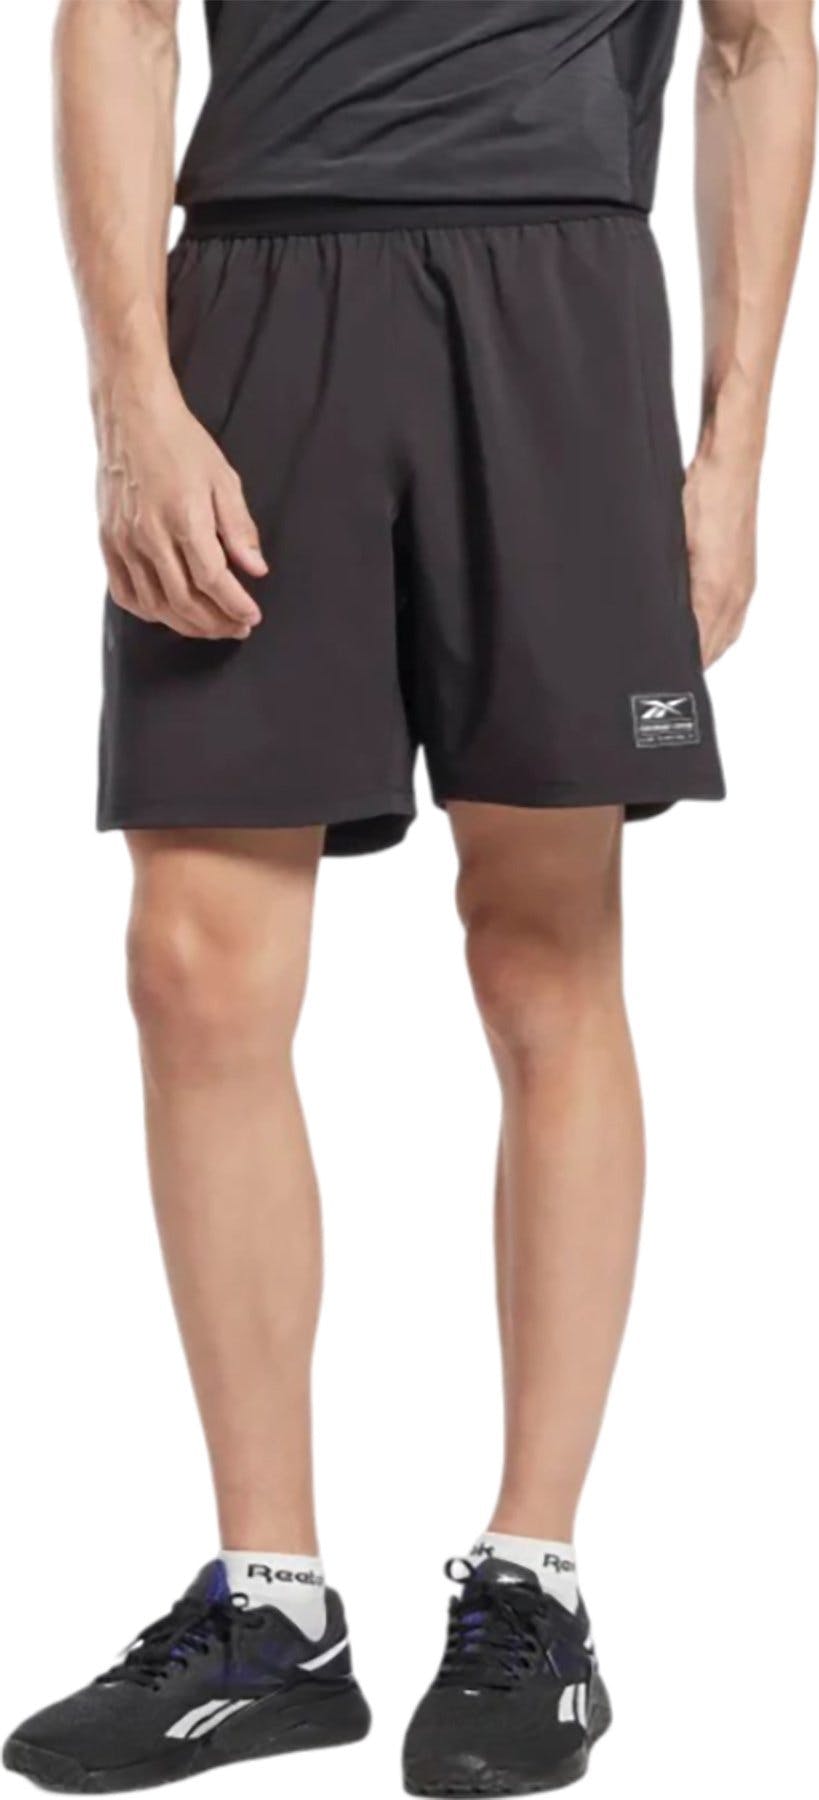 Product image for Performance Certified Strength Short - Men's